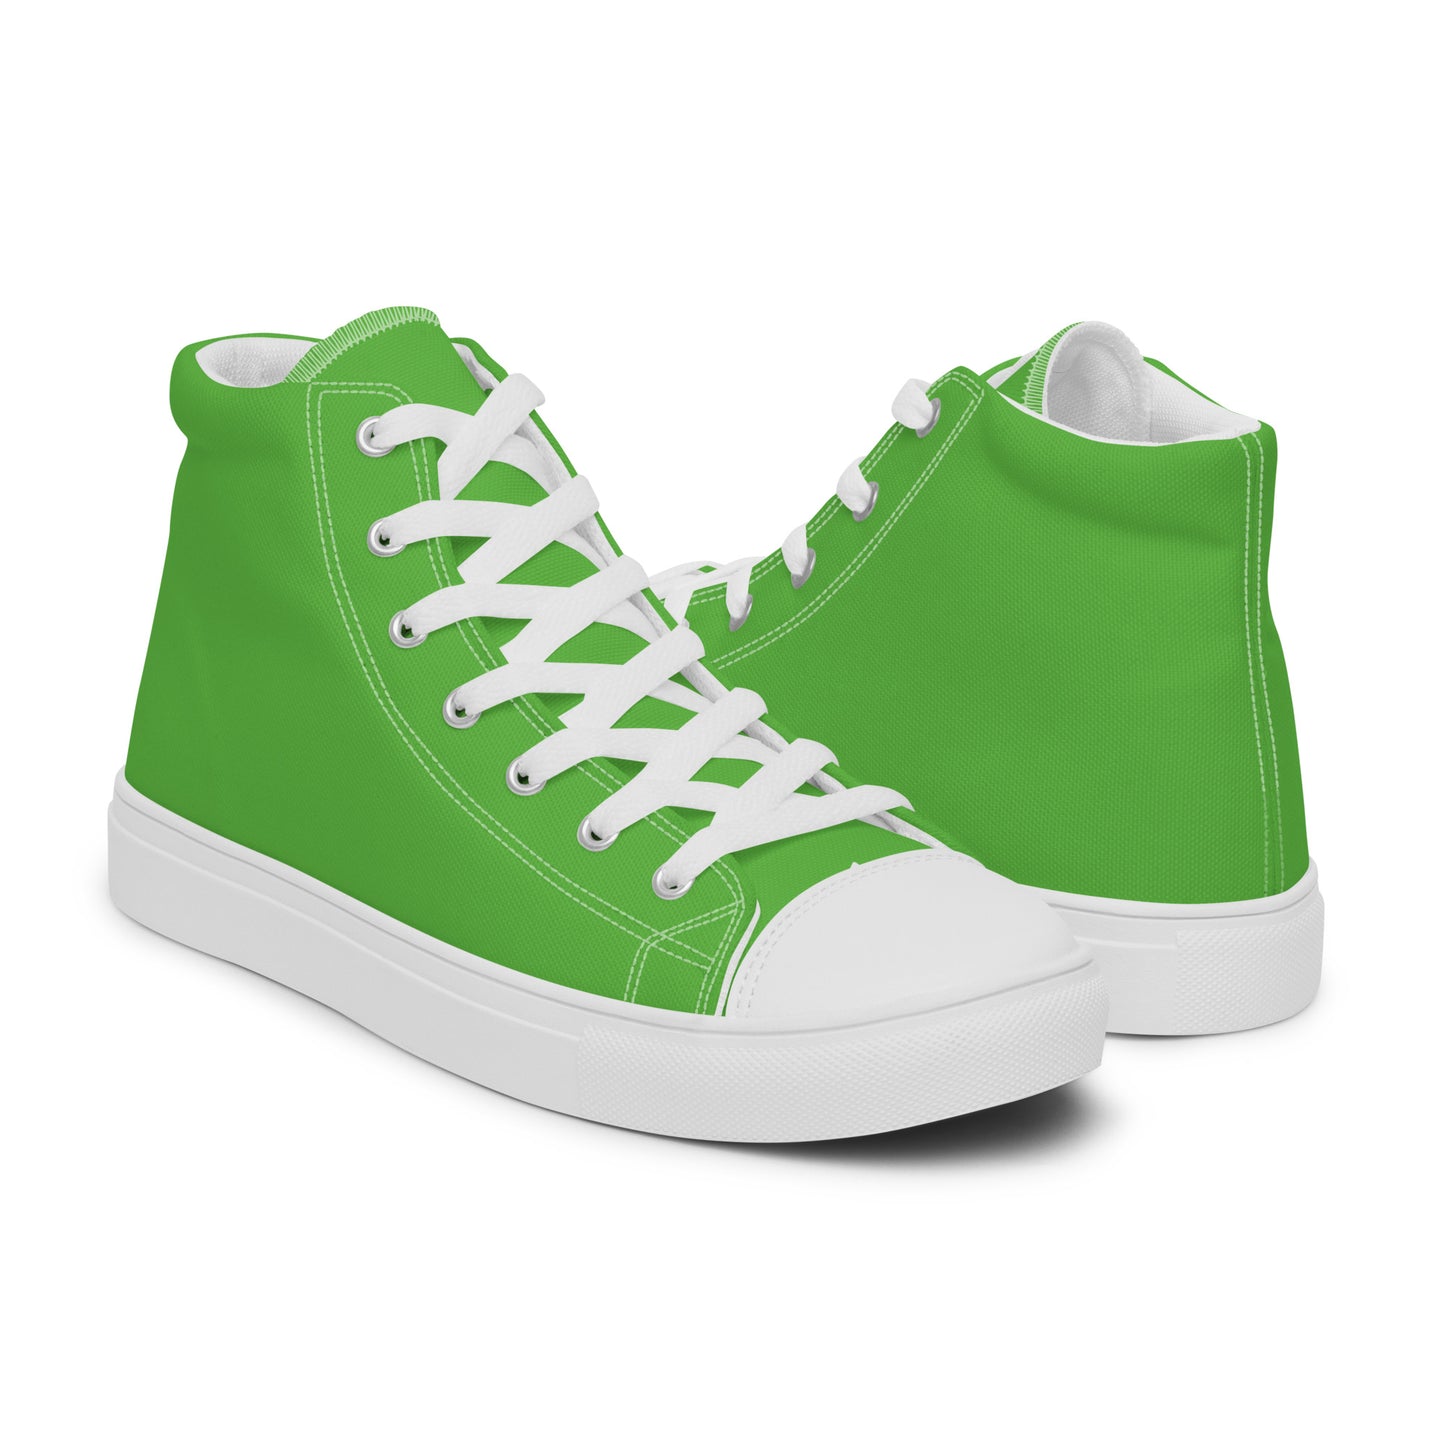 Kelly Green - Sustainably Made Men's High Top Canvas Shoes